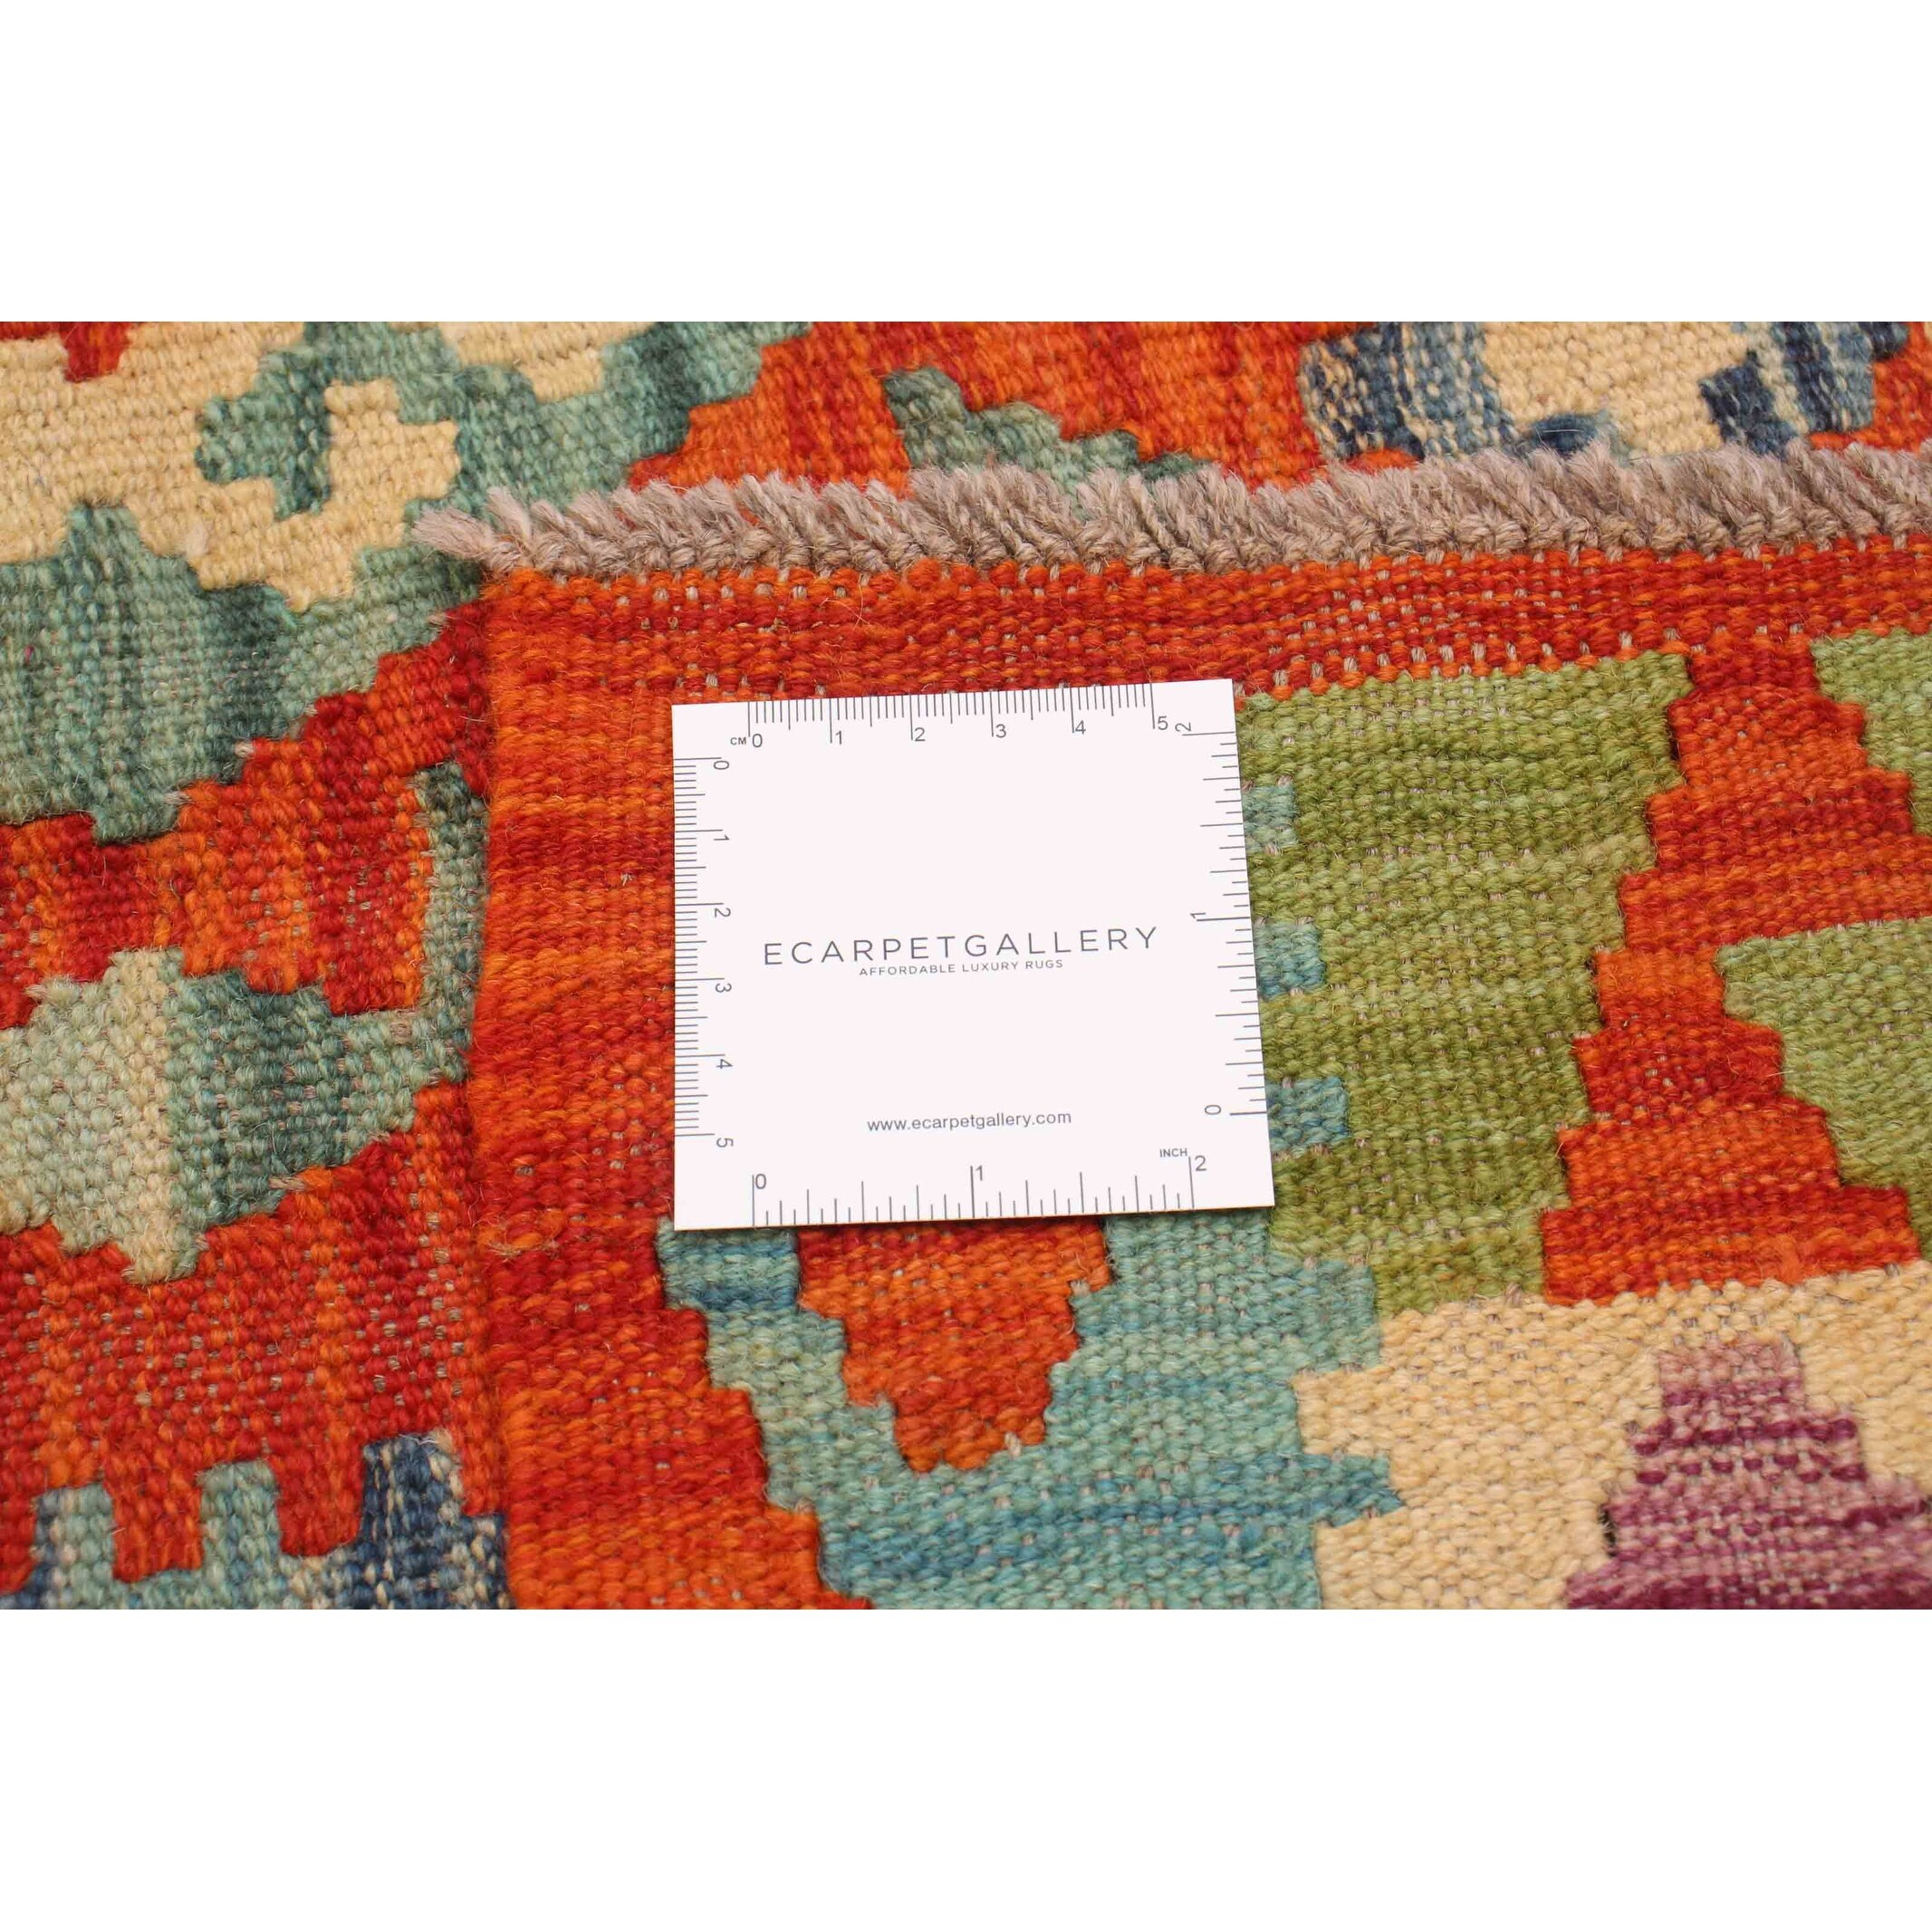 ECARPETGALLERY Flat-Weave Bold and Colorful Red Wool Kilim - 5'0 x 6'6